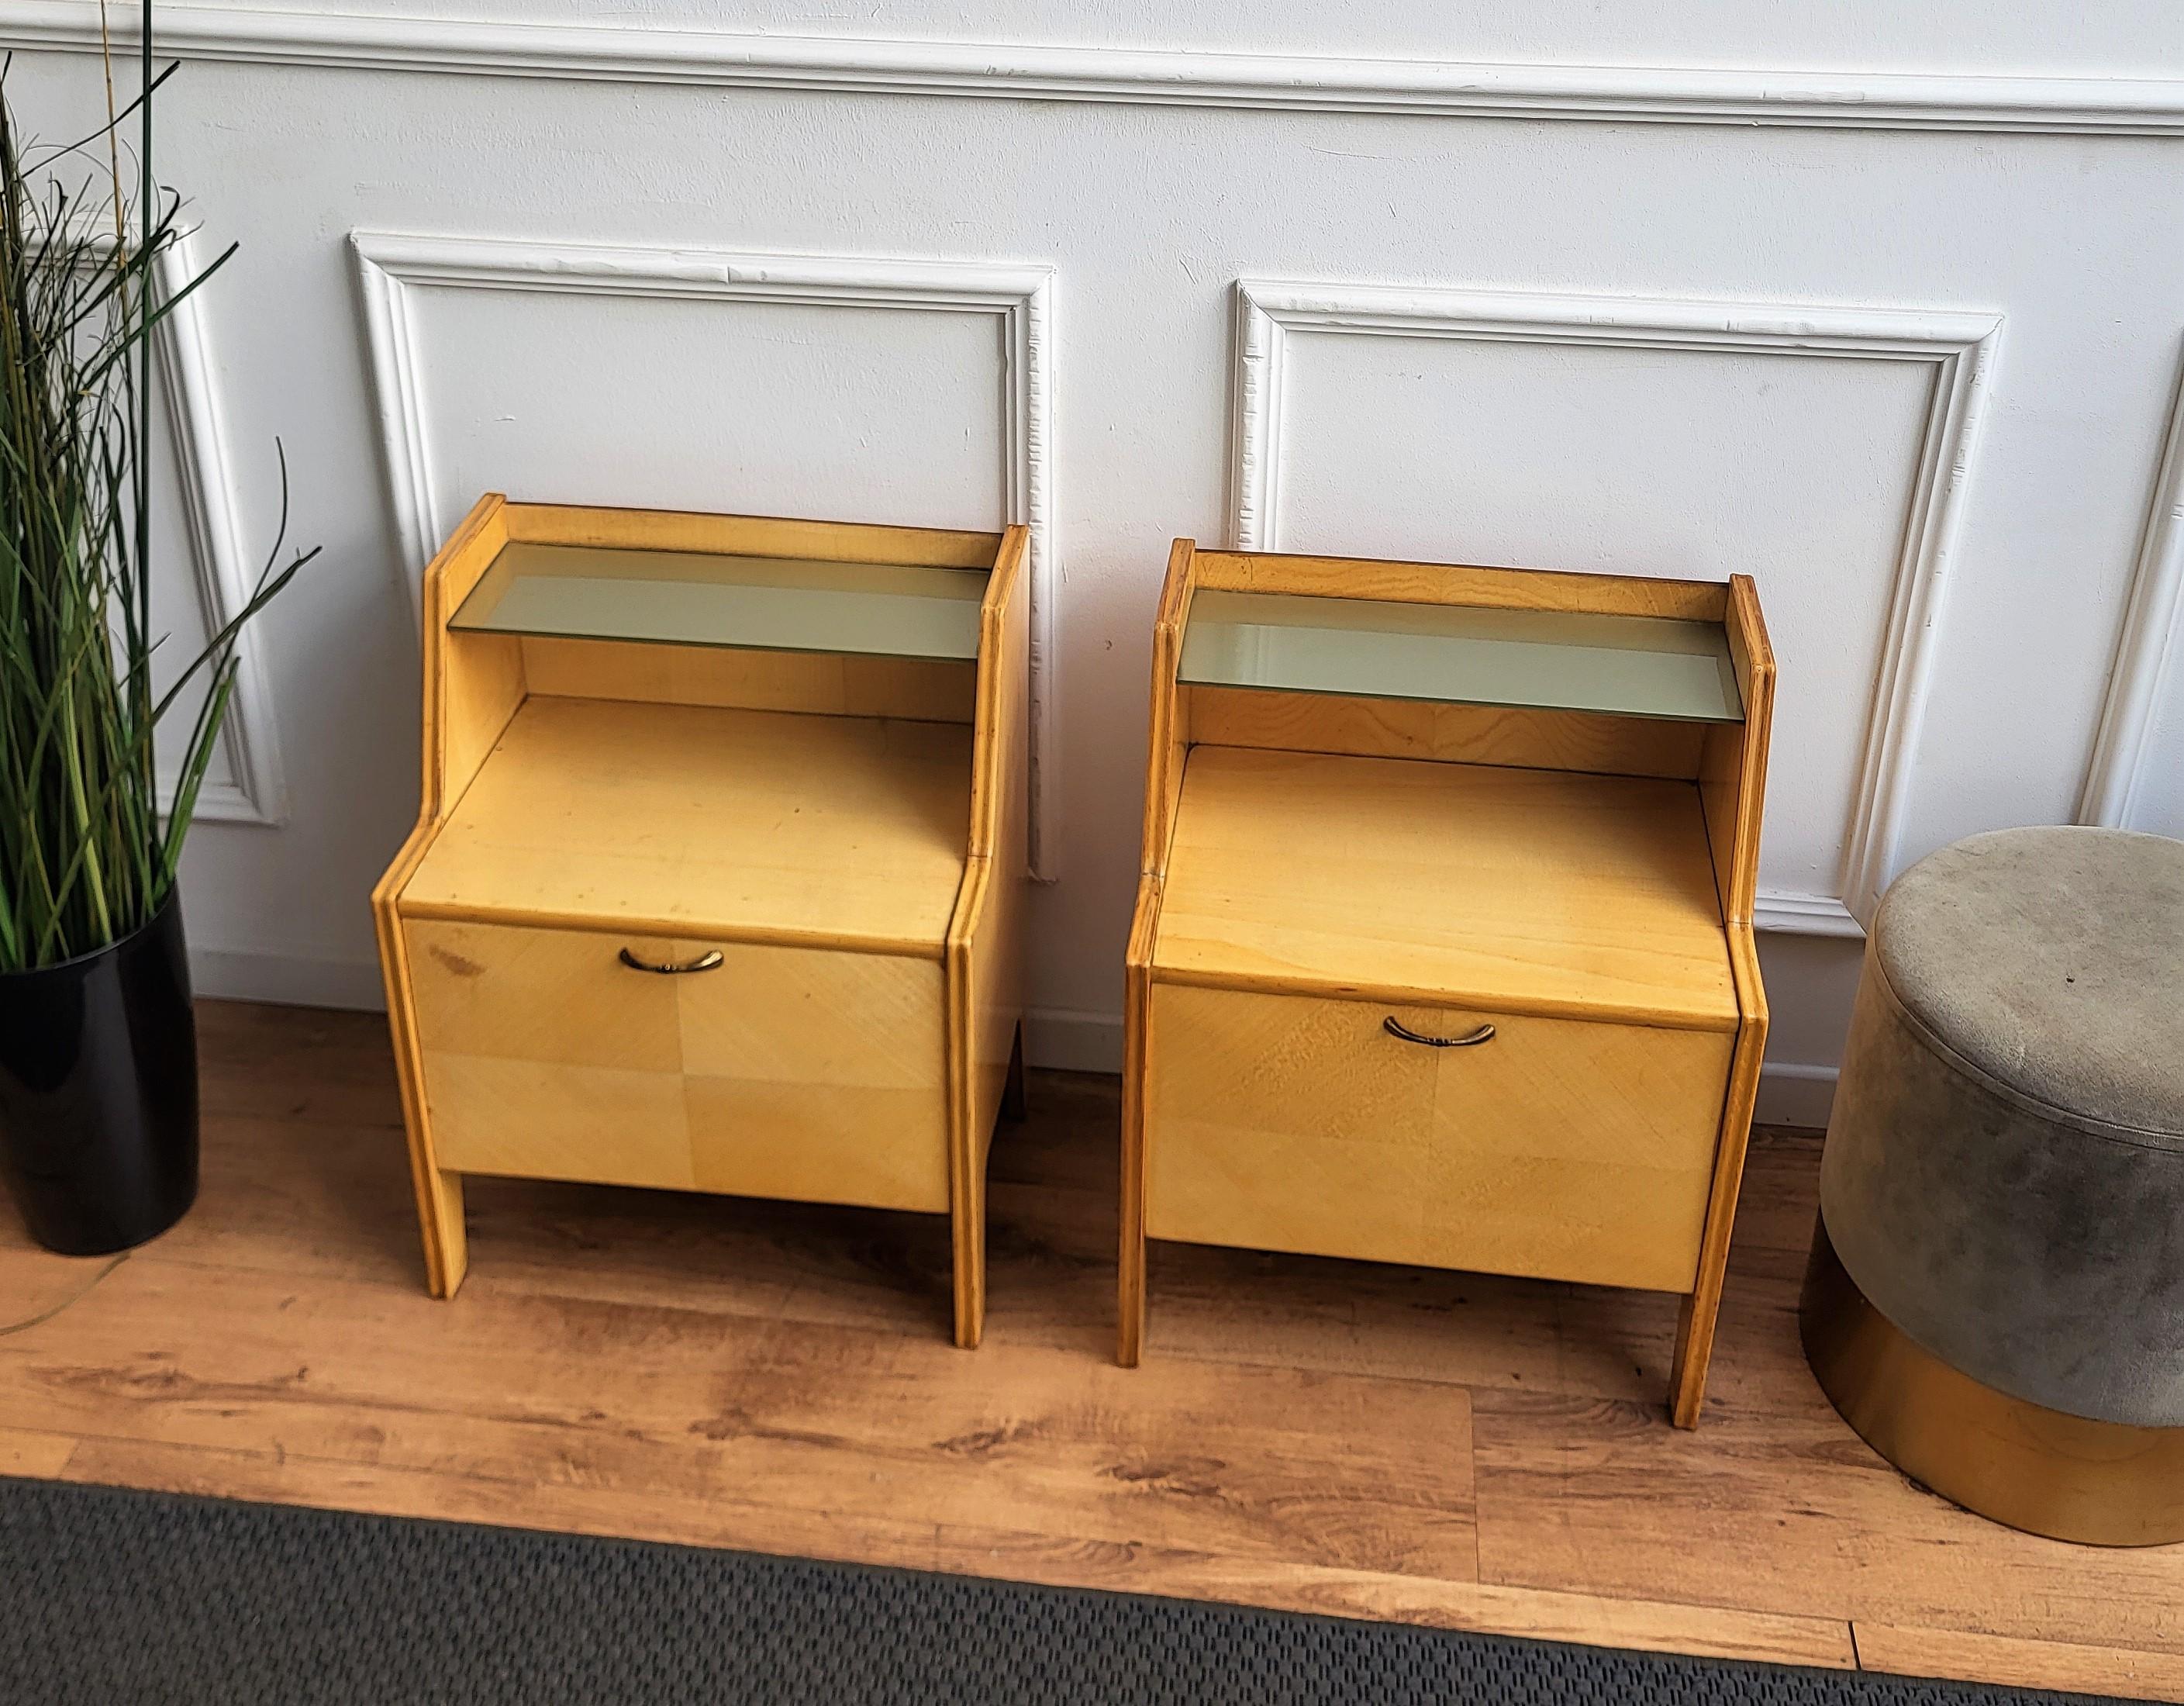 Very elegant and refined Italian 1950s Mid-Century Modern pair of bedside tables with great design of the white maple wood on the frontal door with brass handles and glass shelf. The great vintage shape and design, as well as the brass details make